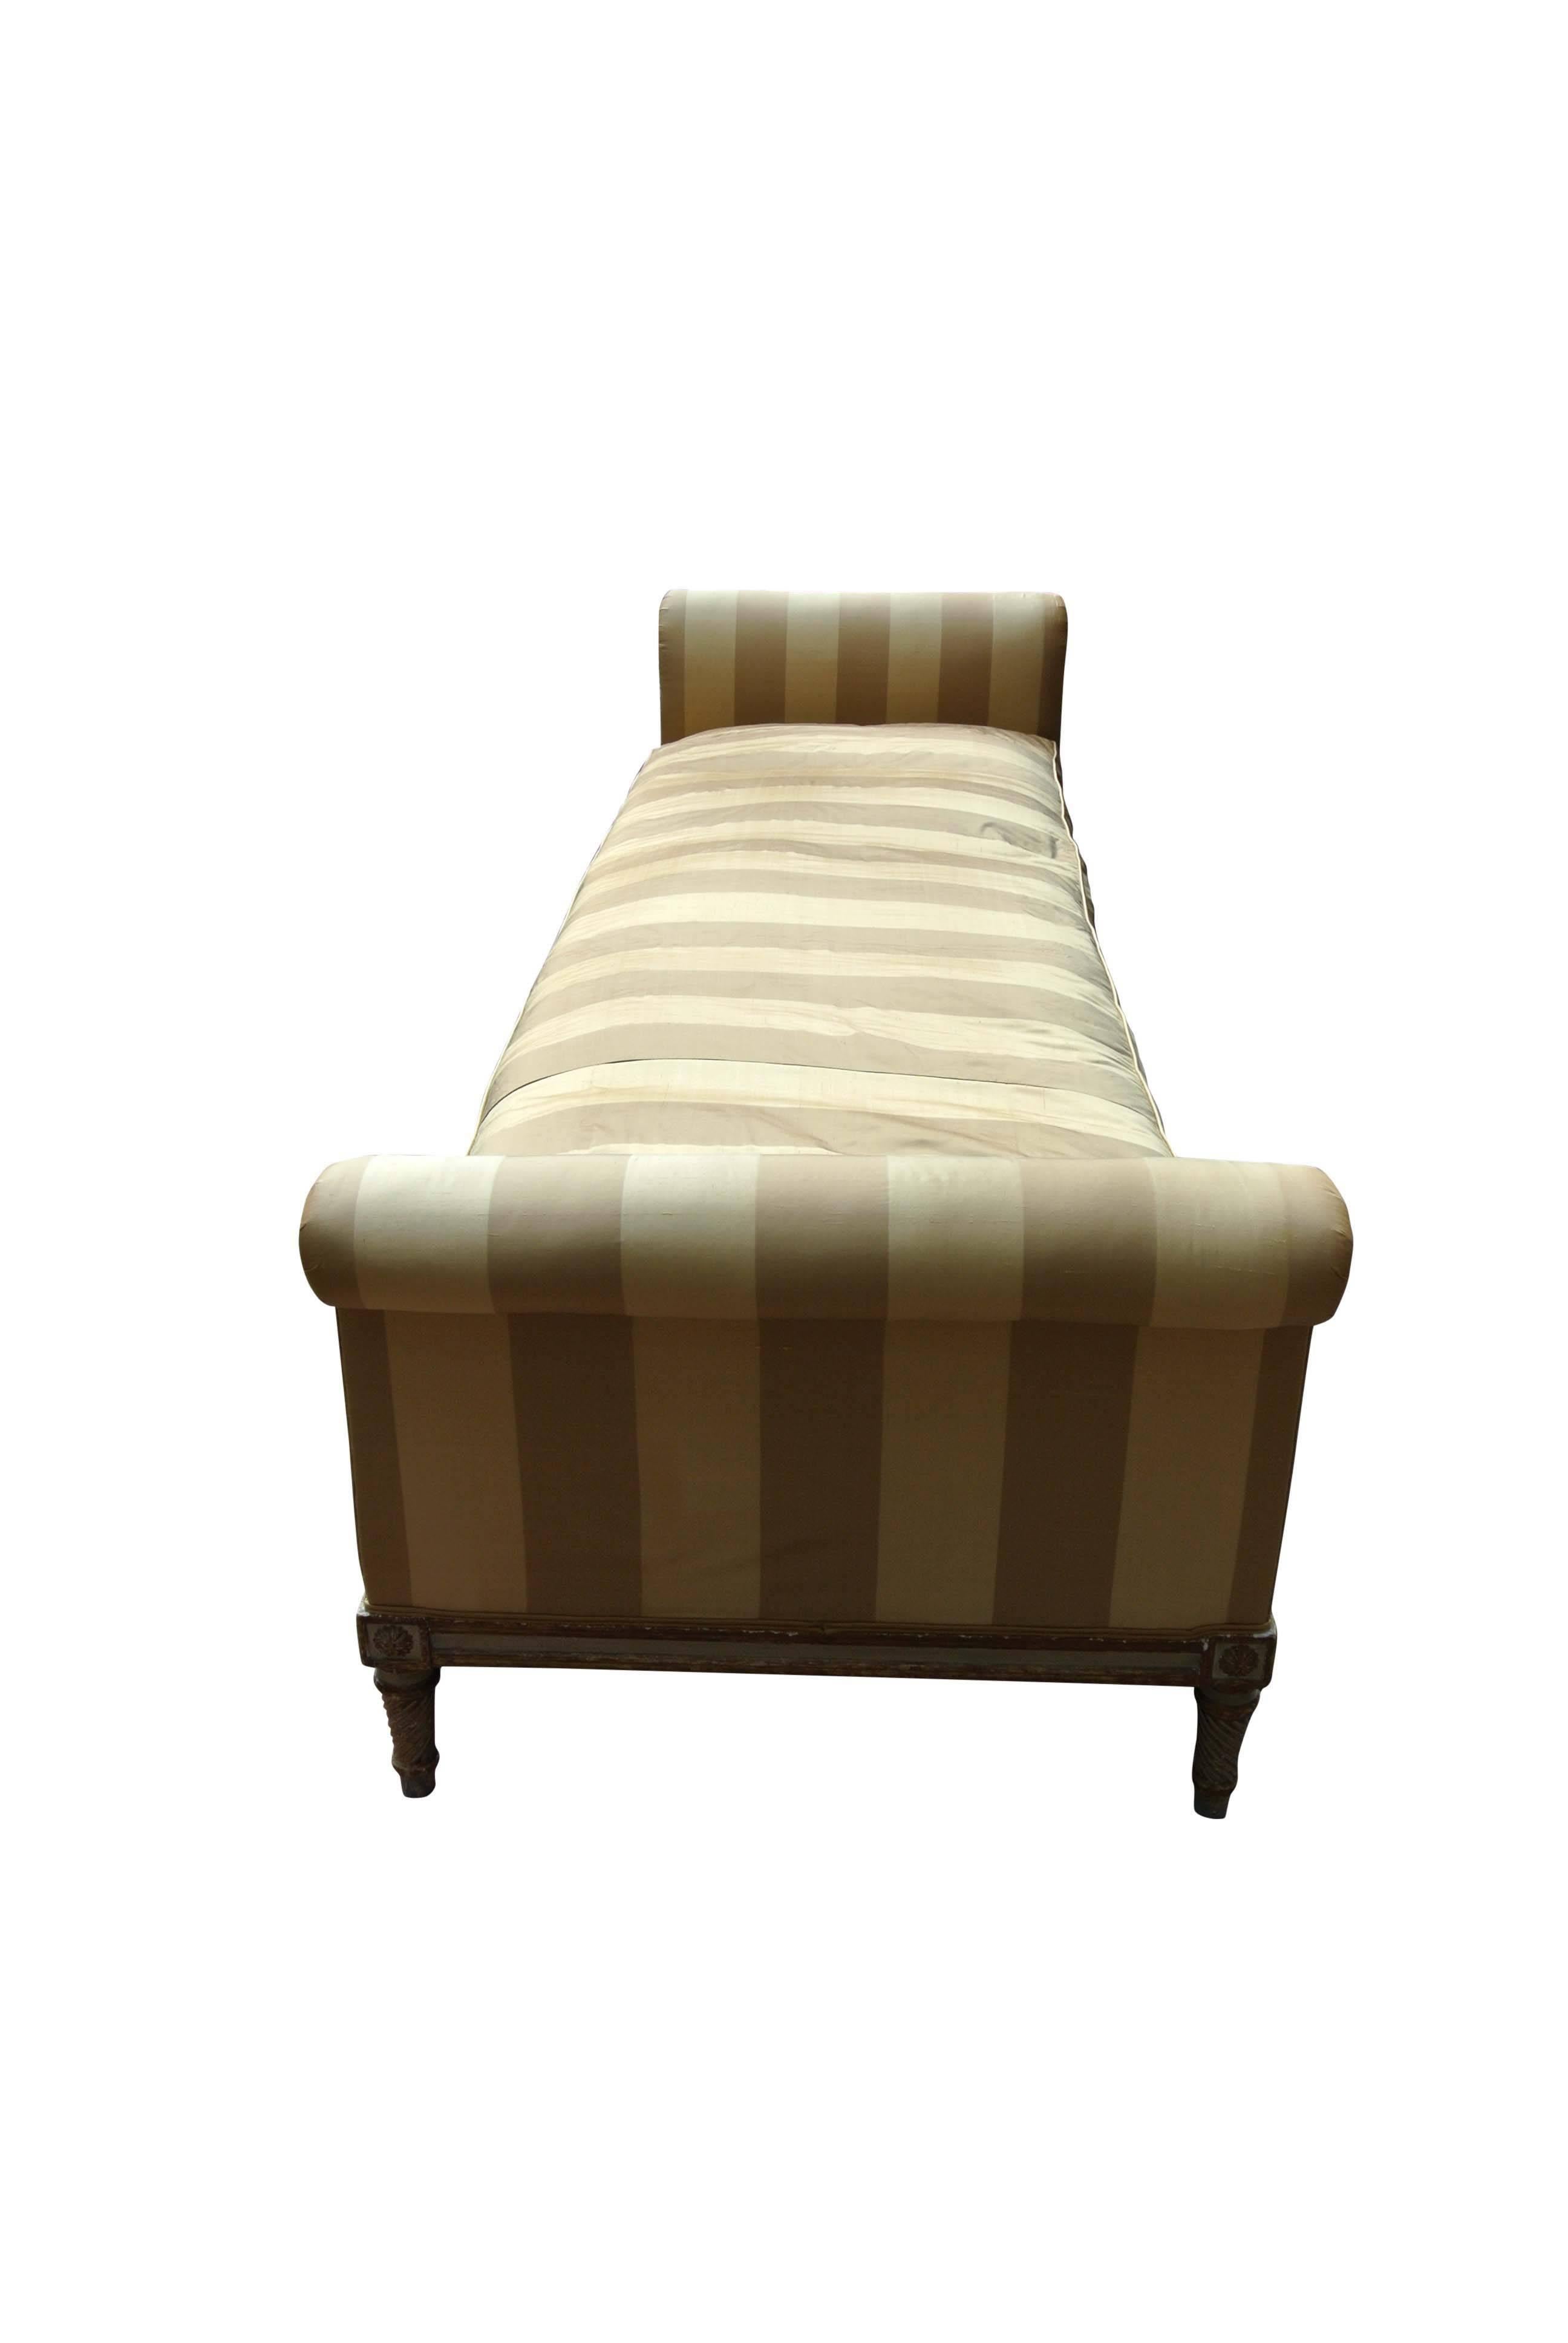 A fine quality pale grey and gilt lit du jour with scrolled ends and original decoration. The upholstery is pure new silk.